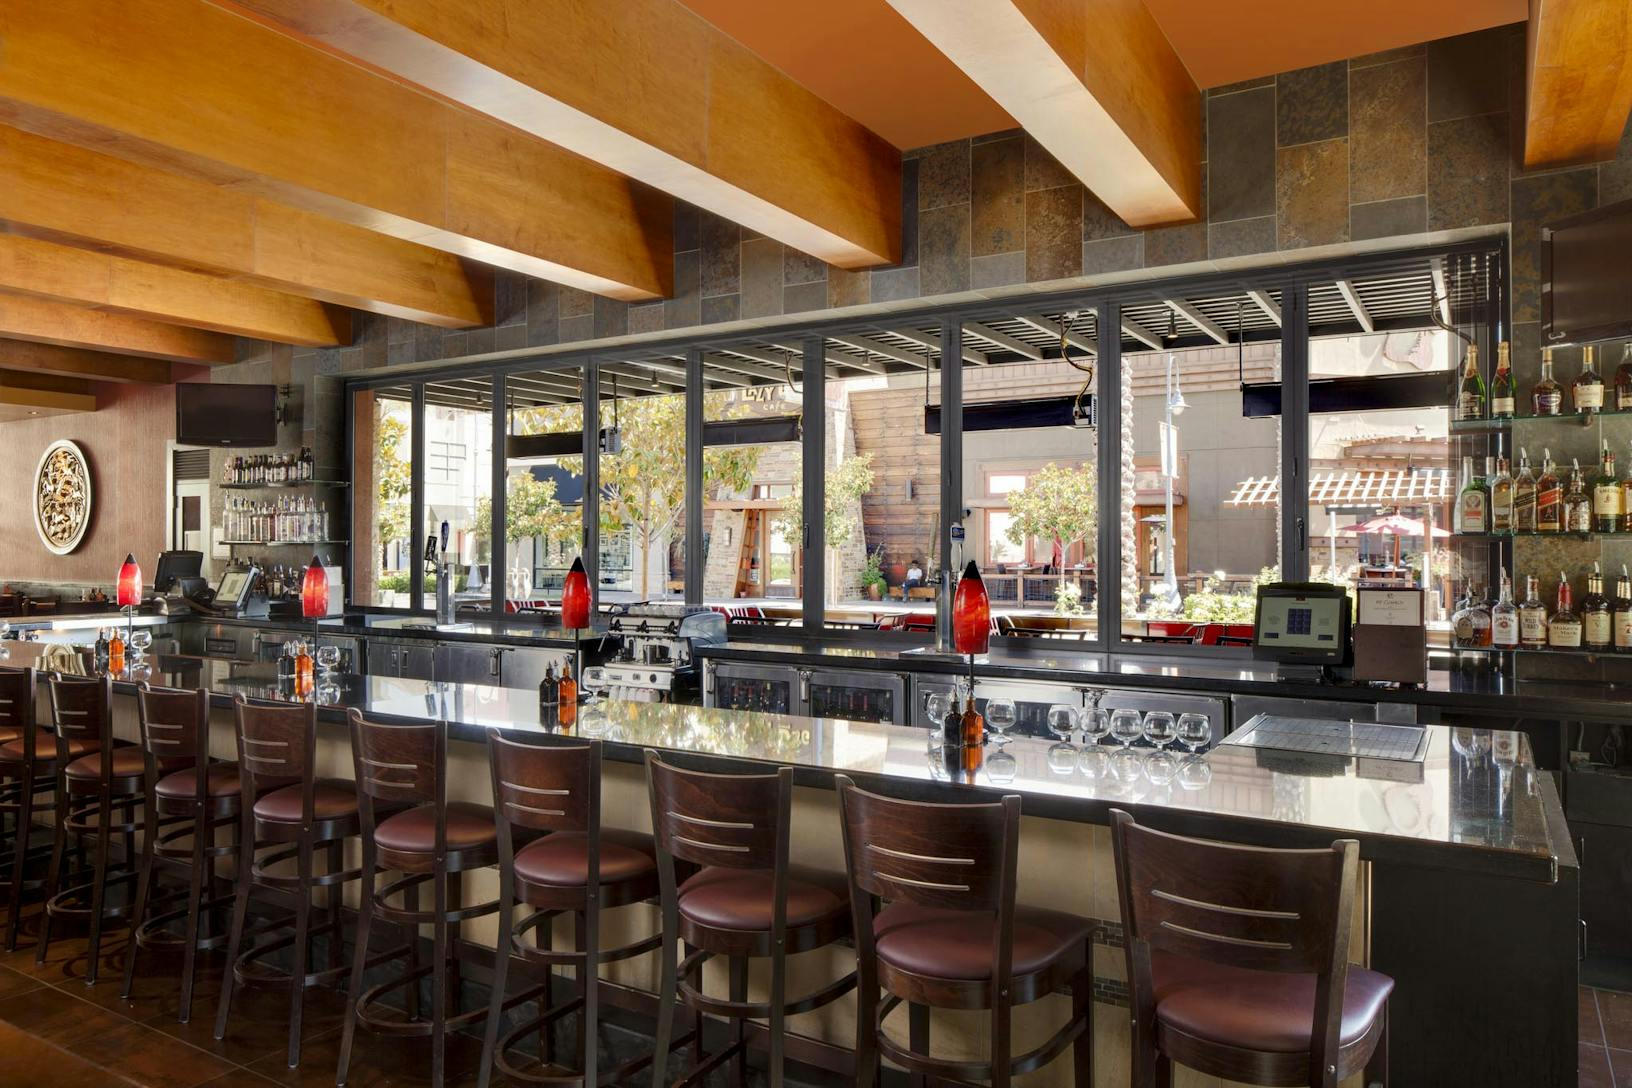 SL45 commercial folding windows at PF Changs Temecula, CA